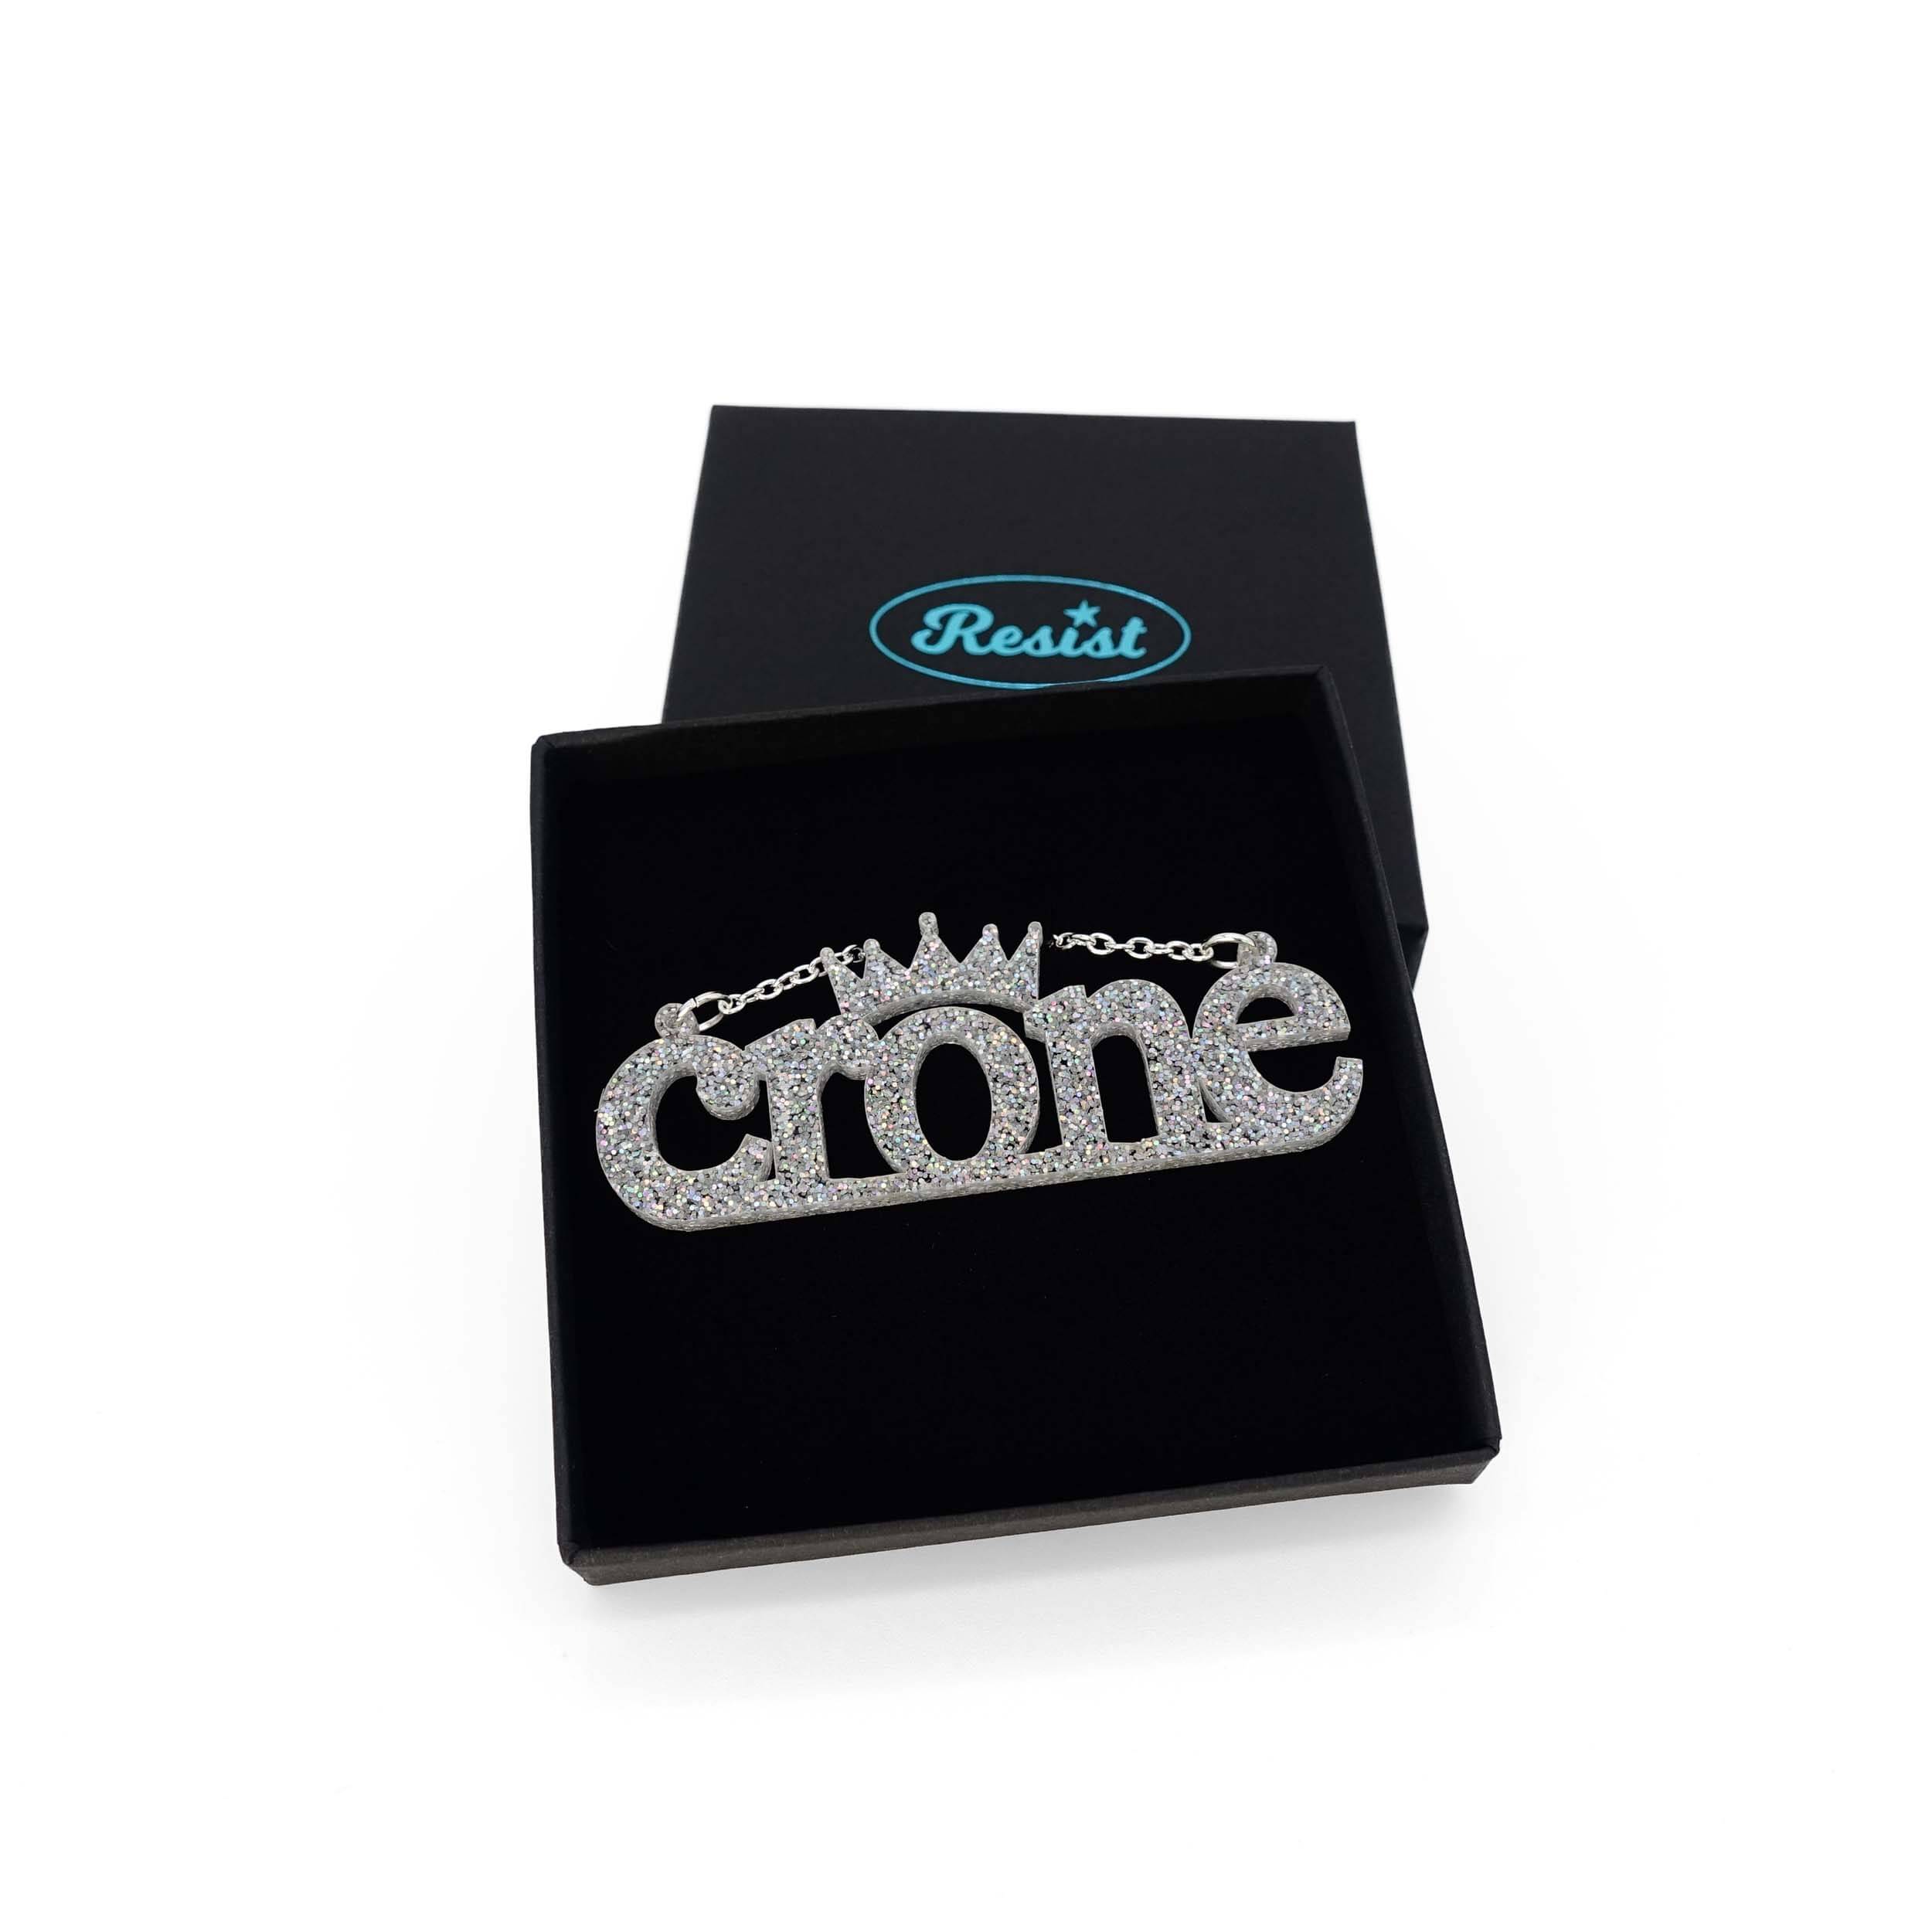 Crone necklace in silver glitter, shown in a Wear and Resist gift box. 